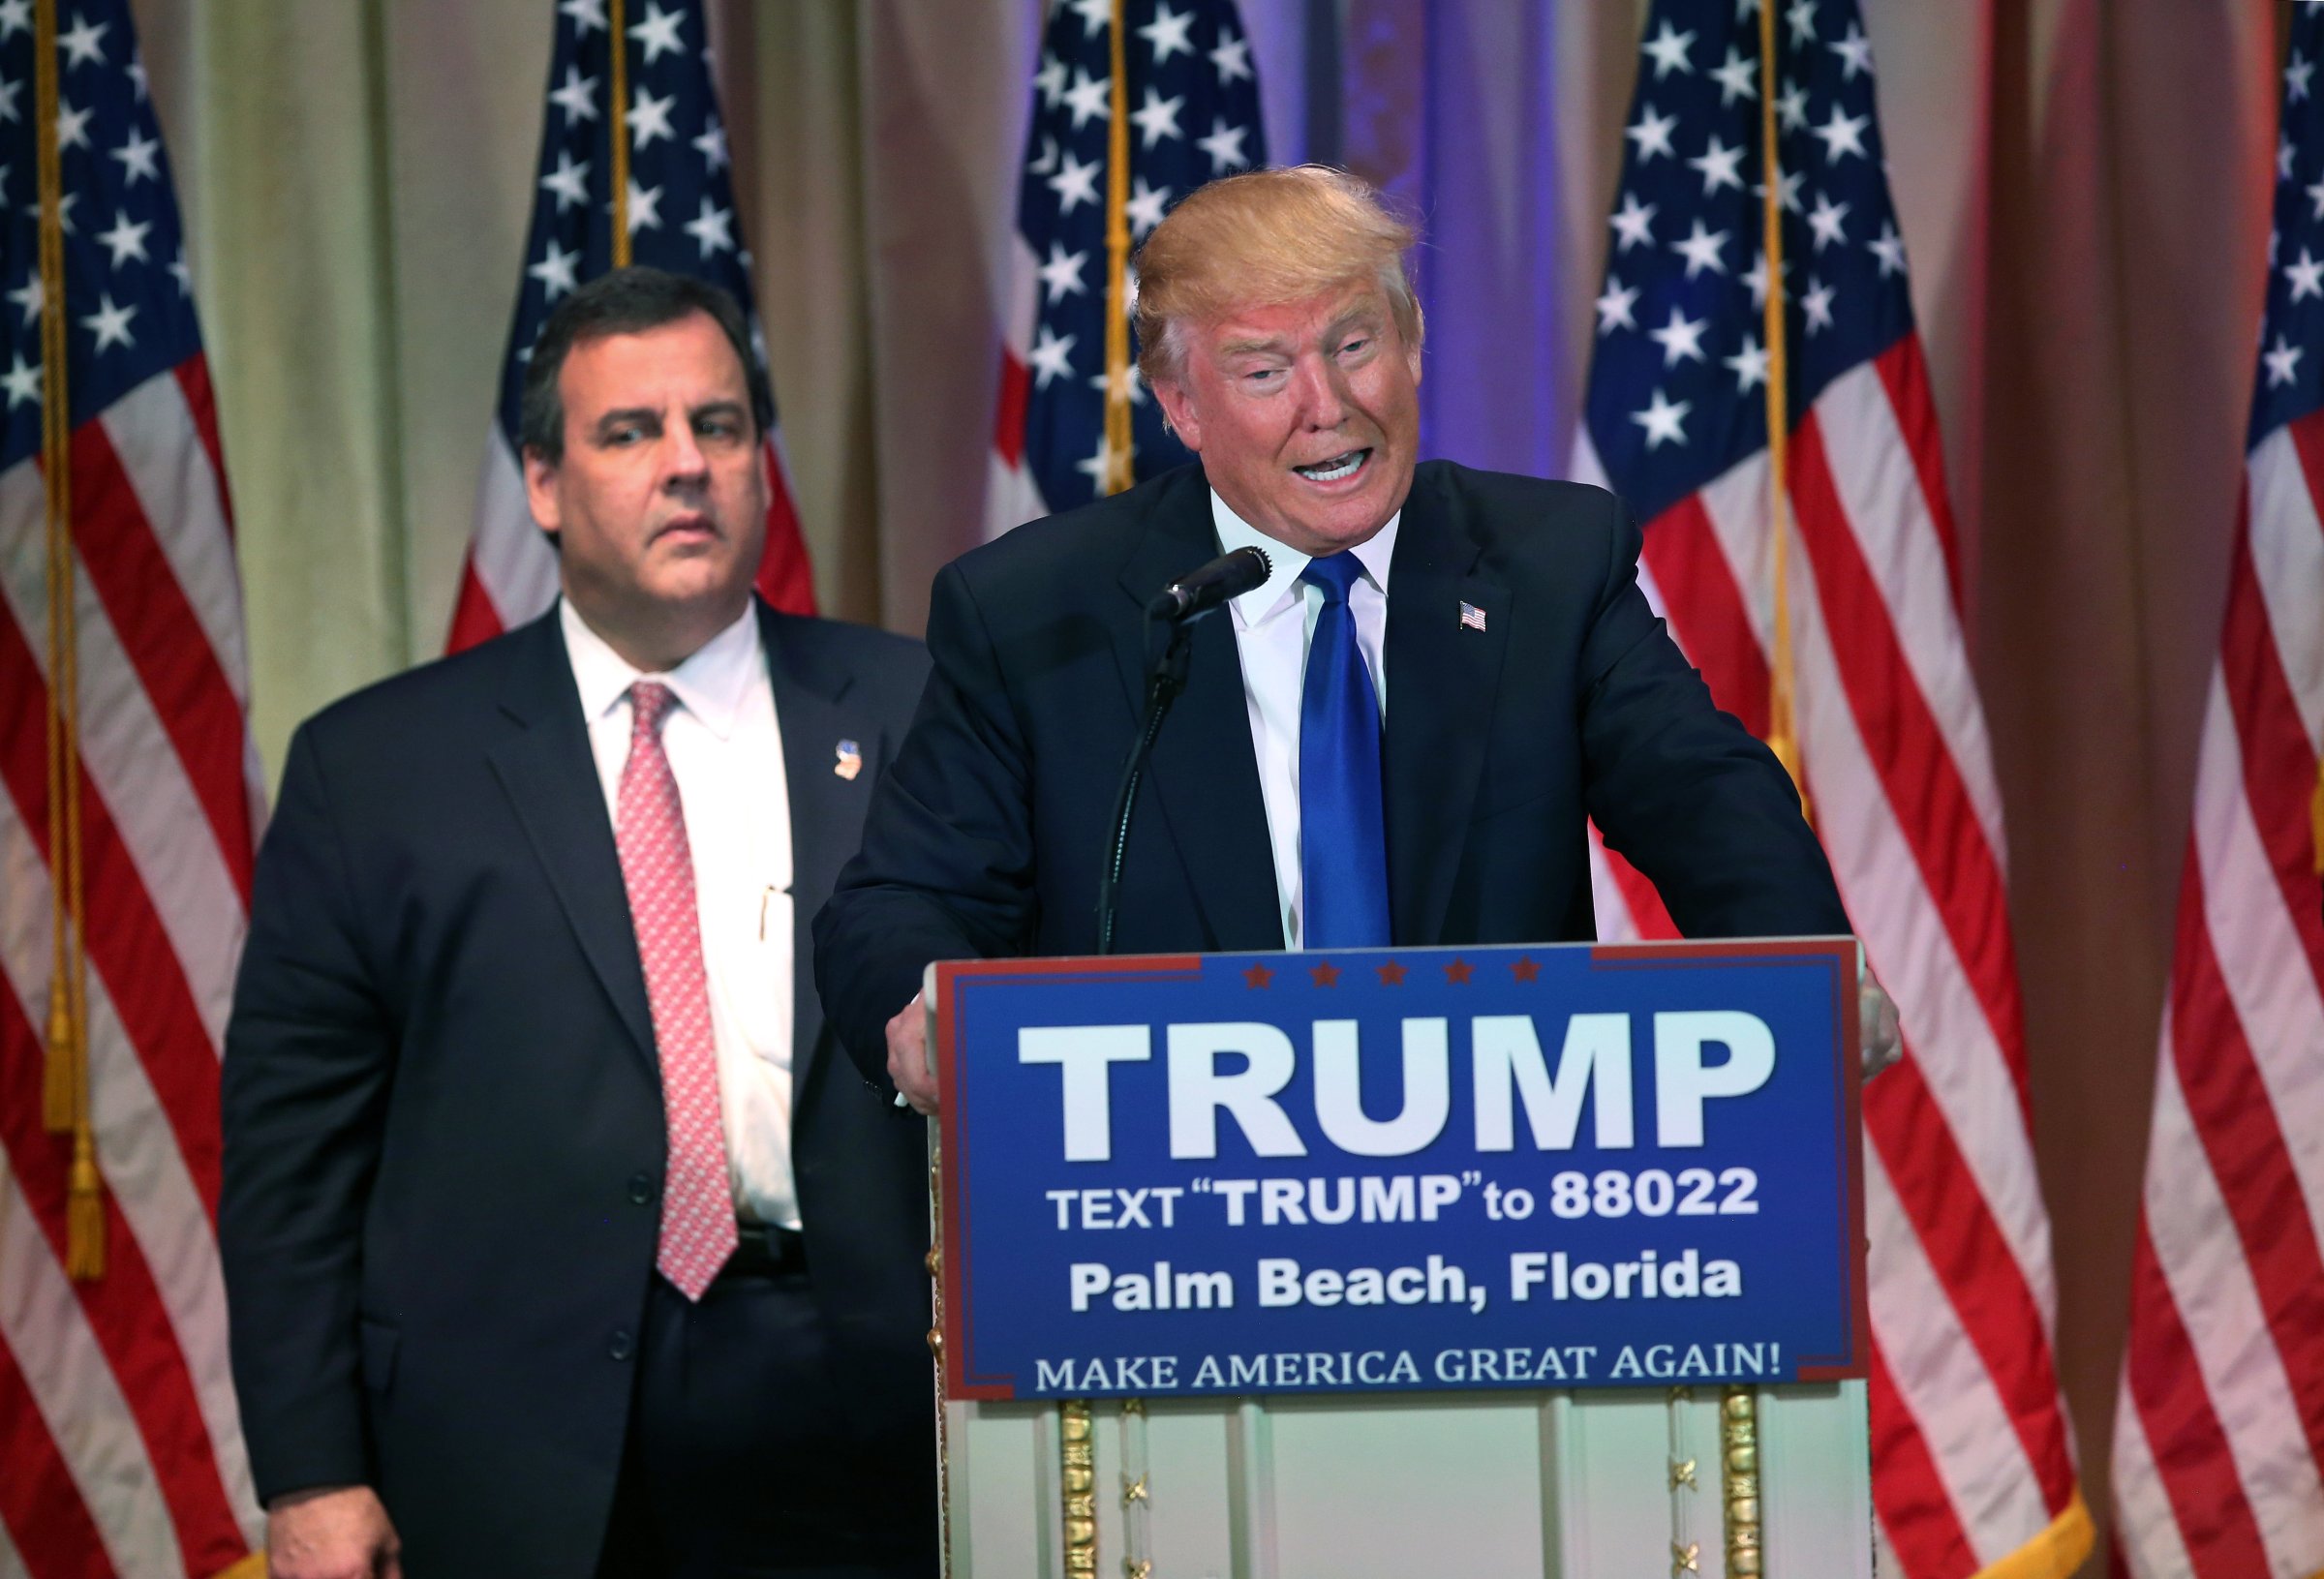 Chris Christie accompanies Donald Trump at a press conference on March 1, 2016 in Palm Beach, Fla.